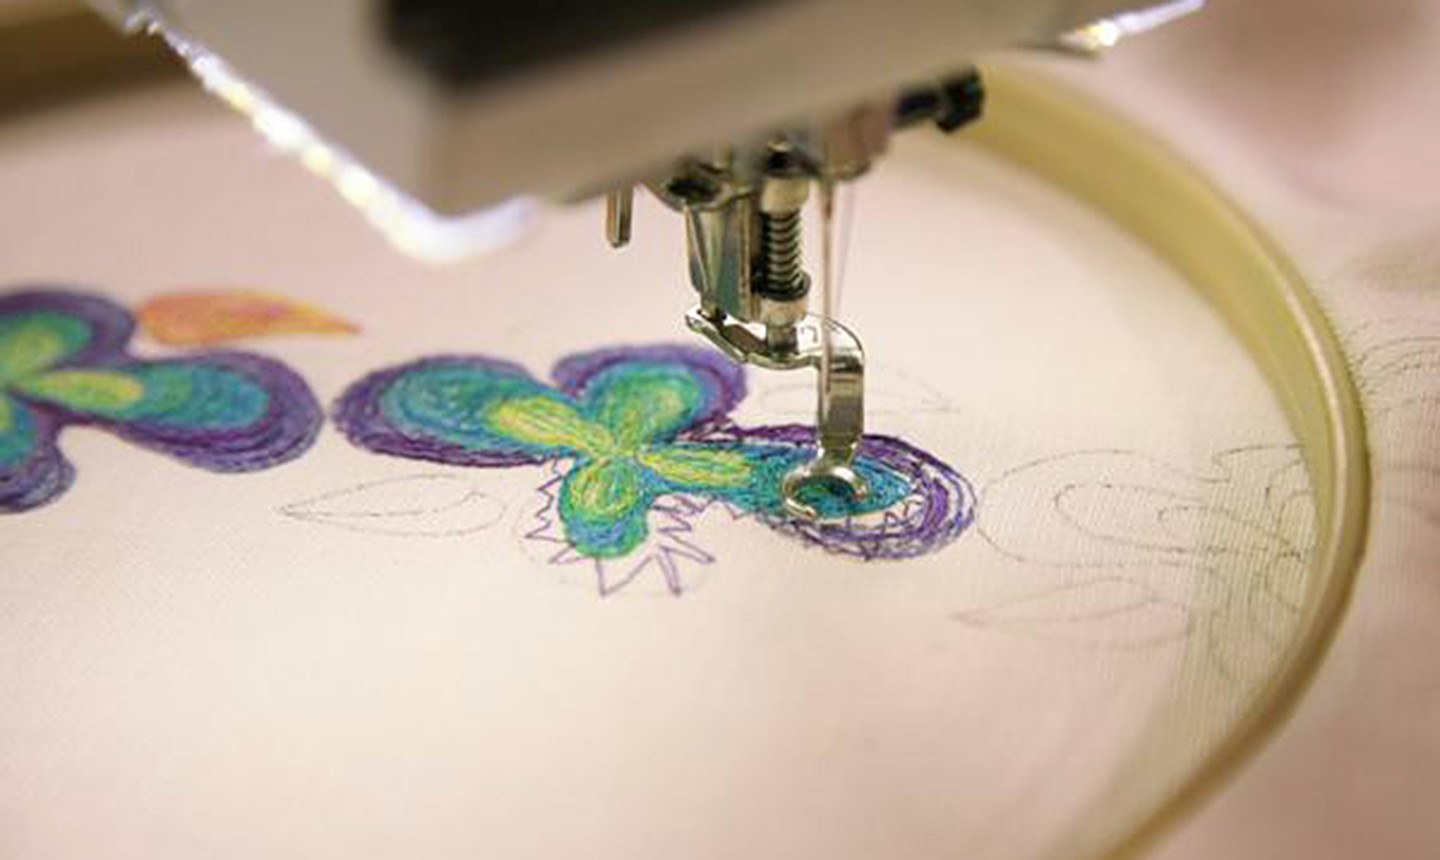 Machine Embroidery Patterns Free How To Free Motion Machine Embroider